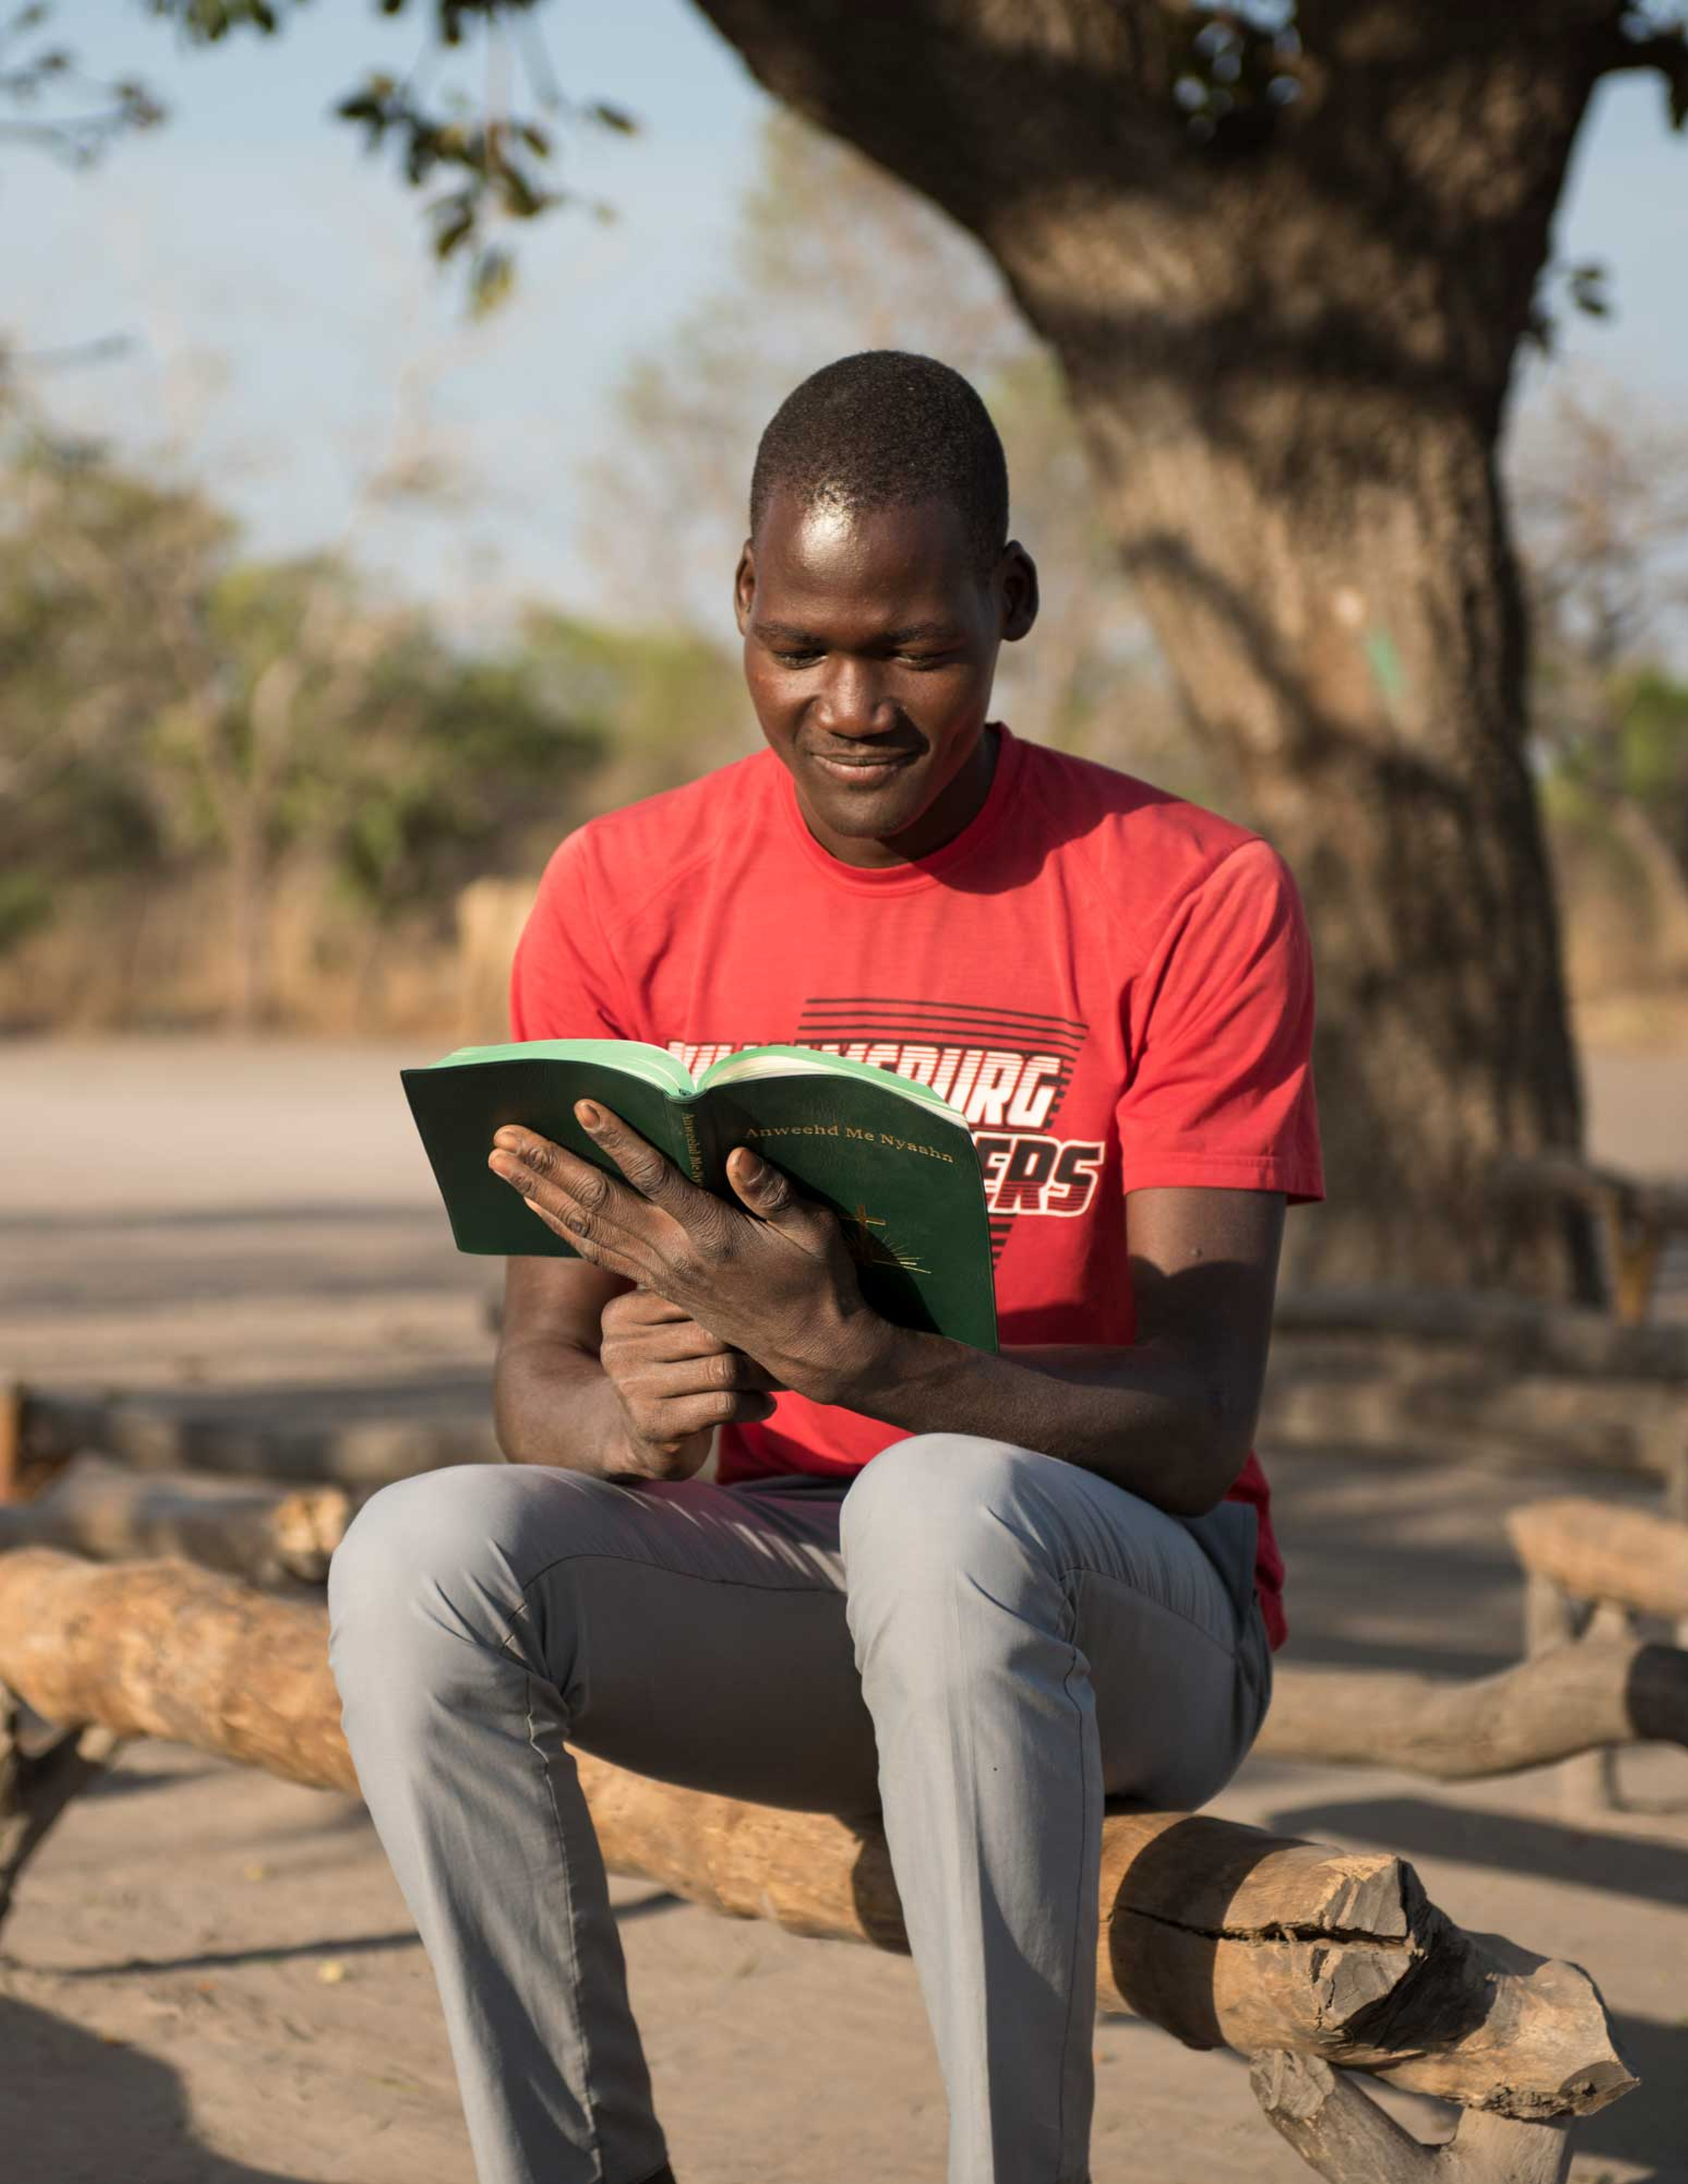 A South Sudanese evangelist reads his bible.